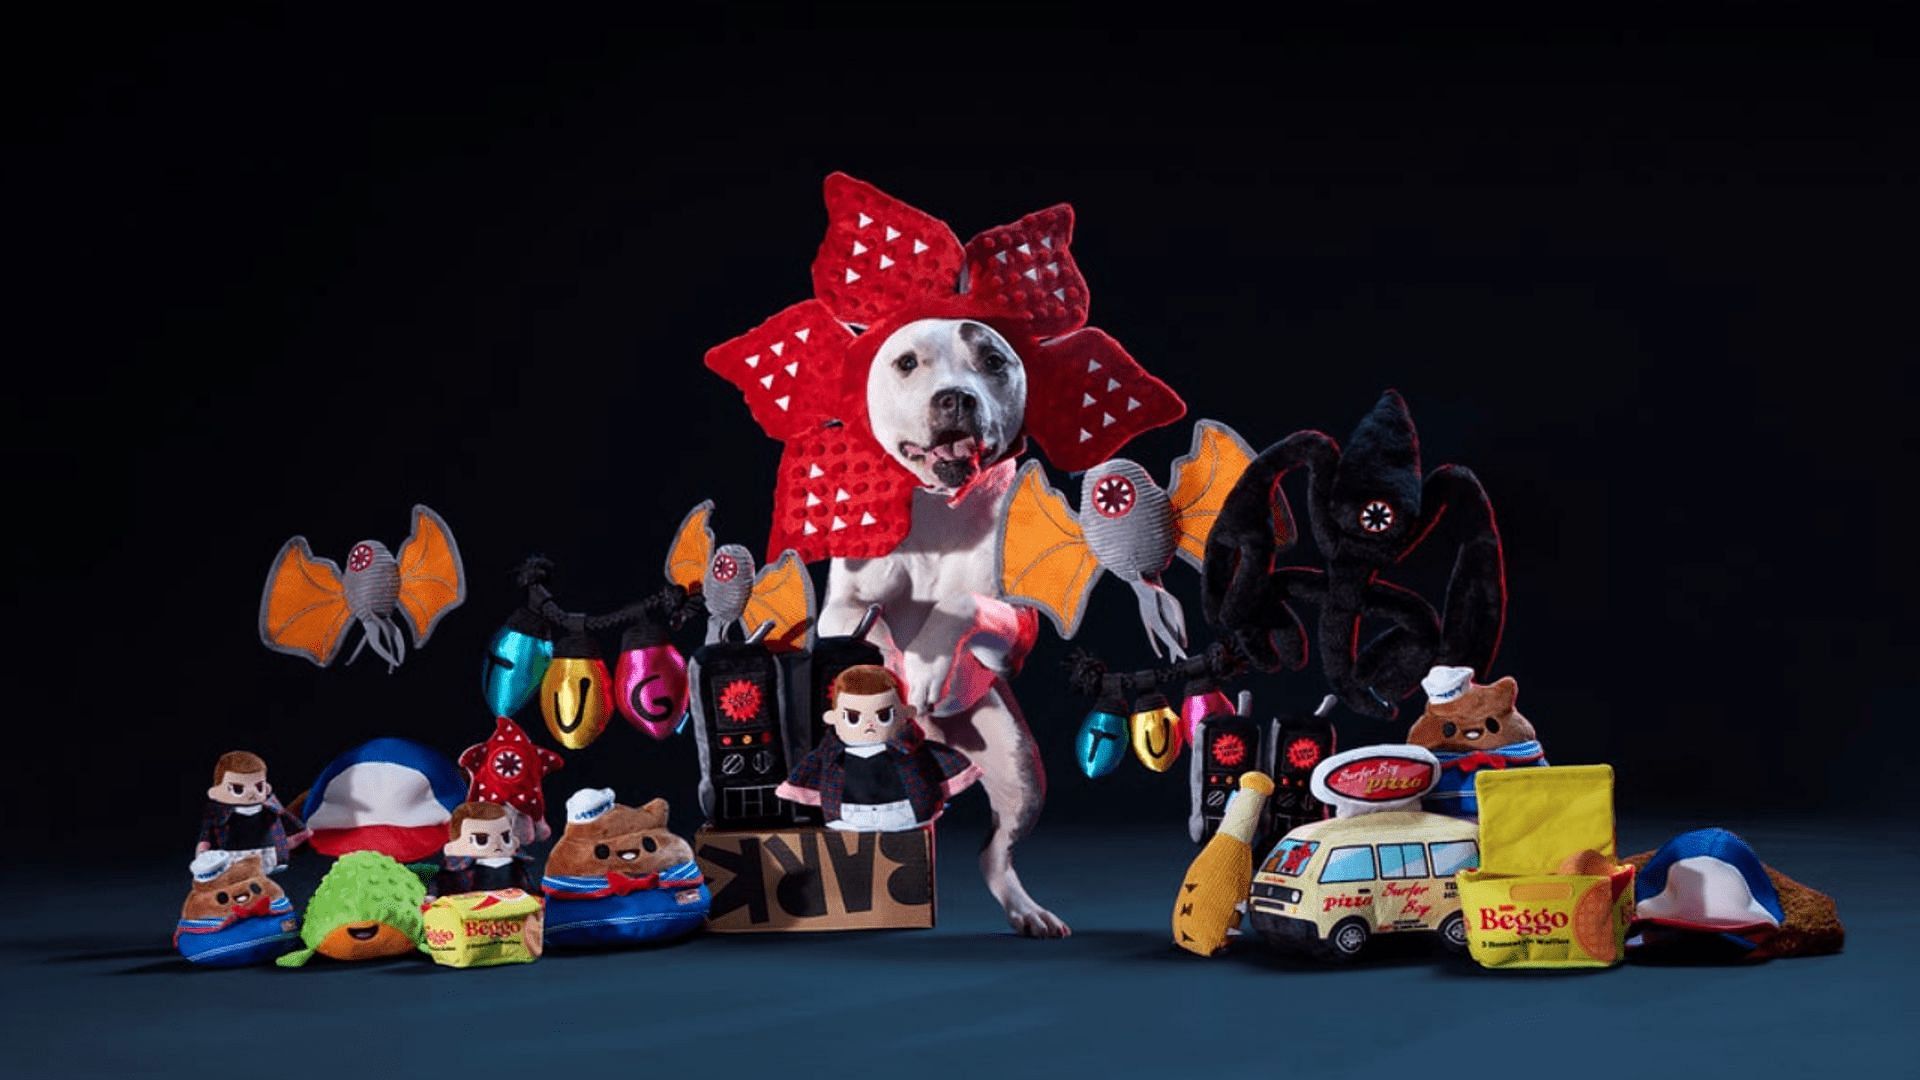 Stranger Things x BarkBox merchandise collection with adorable toys (Image via BARK)